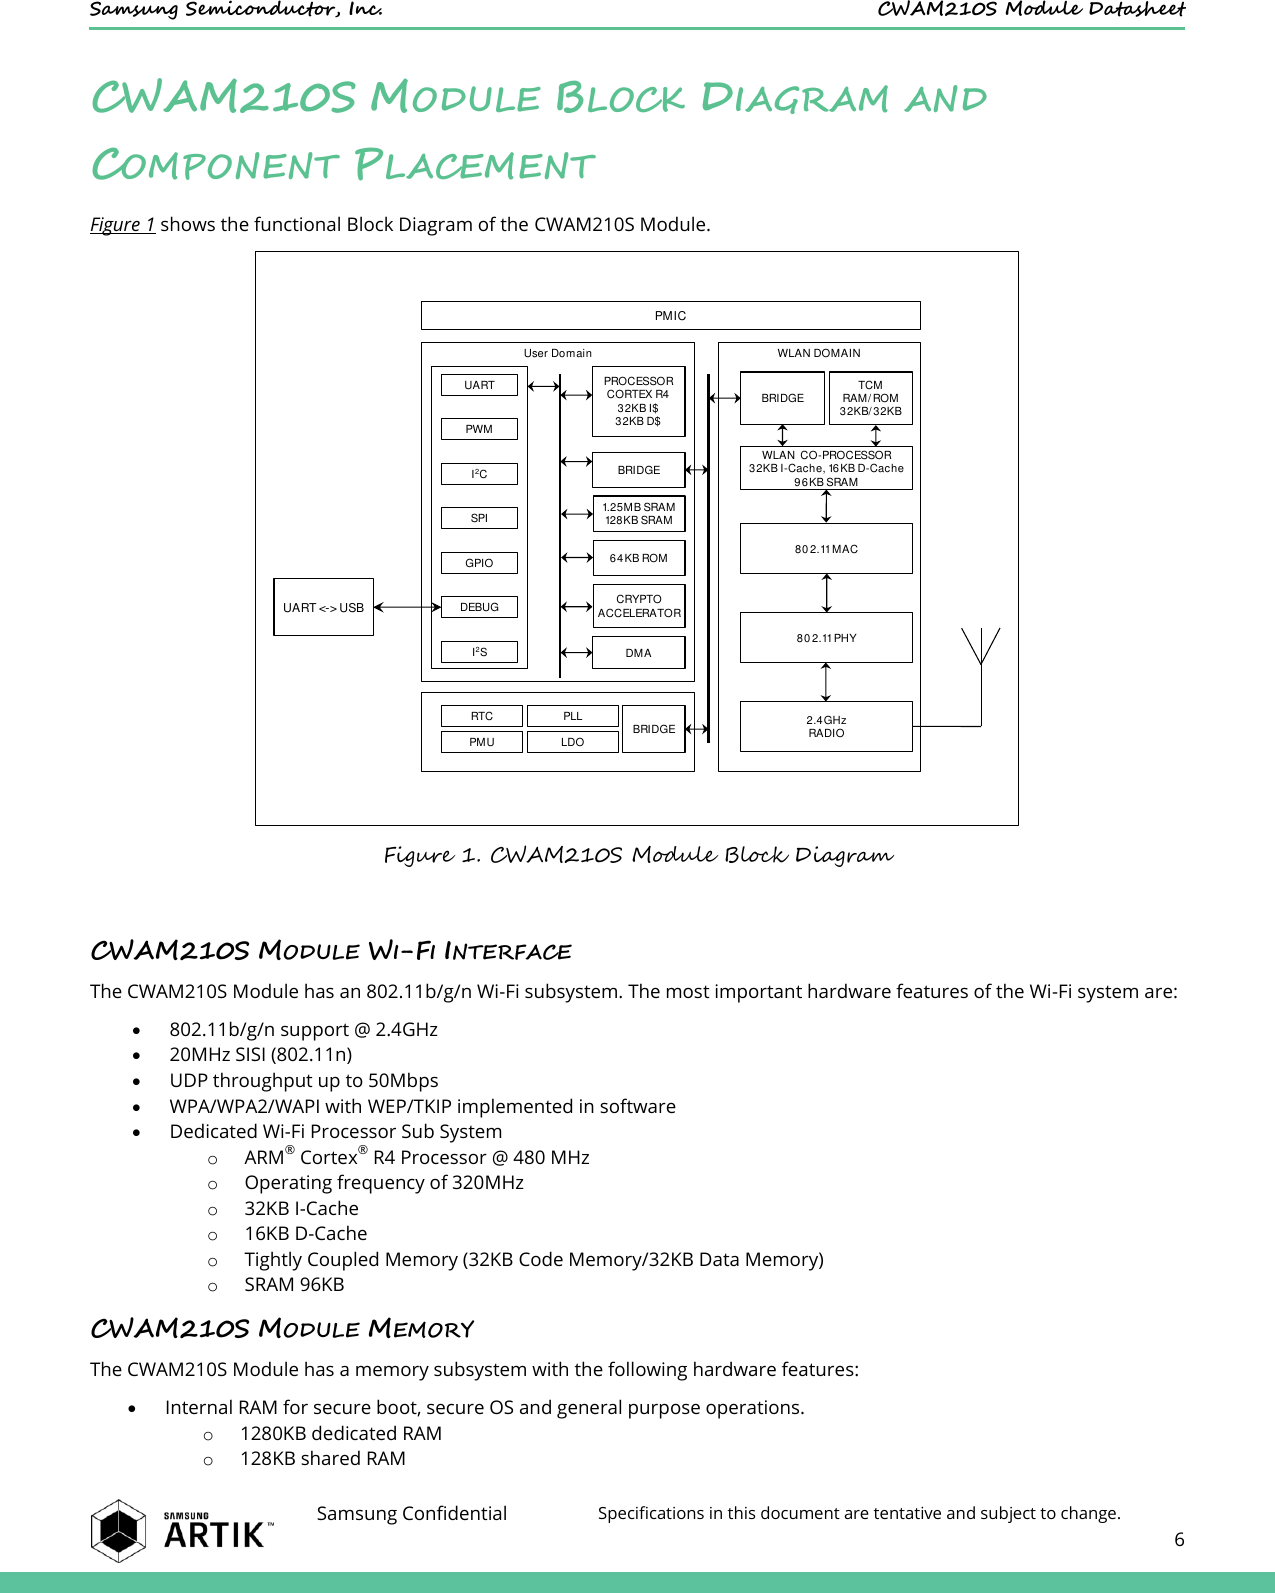    Samsung Semiconductor, Inc.  CWAM210S Module Datasheet    Samsung Confidential Specifications in this document are tentative and subject to change.  6  CWAM210S MODULE BLOCK DIAGRAM AND COMPONENT PLACEMENT Figure 1 shows the functional Block Diagram of the CWAM210S Module.  Figure 1. CWAM210S Module Block Diagram  CWAM210S MODULE WI-FI INTERFACE The CWAM210S Module has an 802.11b/g/n Wi-Fi subsystem. The most important hardware features of the Wi-Fi system are:  802.11b/g/n support @ 2.4GHz  20MHz SISI (802.11n)  UDP throughput up to 50Mbps  WPA/WPA2/WAPI with WEP/TKIP implemented in software  Dedicated Wi-Fi Processor Sub System o ARM® Cortex® R4 Processor @ 480 MHz o Operating frequency of 320MHz o 32KB I-Cache o 16KB D-Cache o Tightly Coupled Memory (32KB Code Memory/32KB Data Memory) o SRAM 96KB CWAM210S MODULE MEMORY The CWAM210S Module has a memory subsystem with the following hardware features:  Internal RAM for secure boot, secure OS and general purpose operations. o 1280KB dedicated RAM o 128KB shared RAM User DomainUARTPWMSPIGPIODEBUGI2SPROCESSORCORTEX R432KB I$32KB D$BRIDGECRYPTOACCELERATORDMATCMRAM/ ROM32KB/ 32KBBRIDGEWLAN  CO-PROCESSOR32KB I-Cache, 16KB D-Cache96KB SRAM80 2.11 MACWLAN DOMAIN2.4GHz RADIORTCPMUPLLLDO BRIDGE80 2.11 PHYI2C1.25MB SRAM128KB SRAM64KB ROMUART &lt;-&gt; USBPMIC